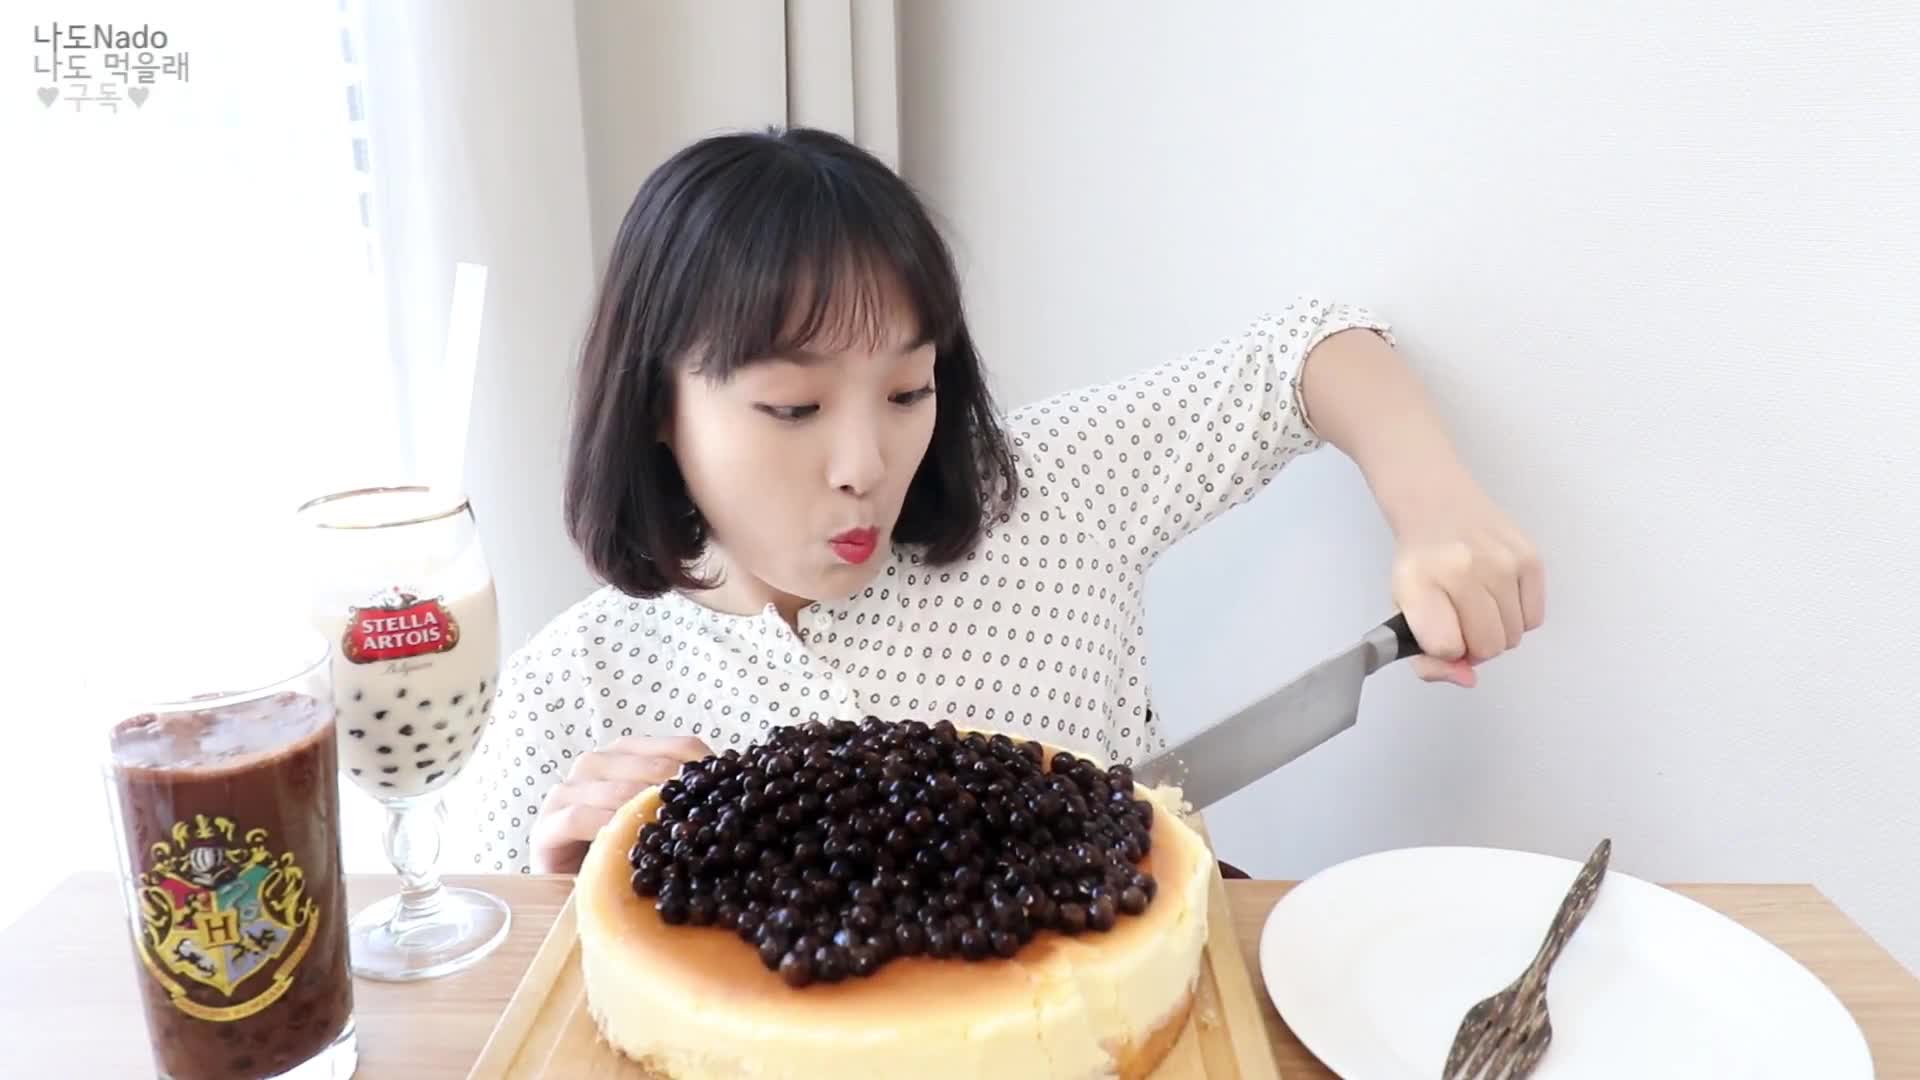 [Earphone Eating and Broadcasting] Serge Cake is more delicious with earphones!